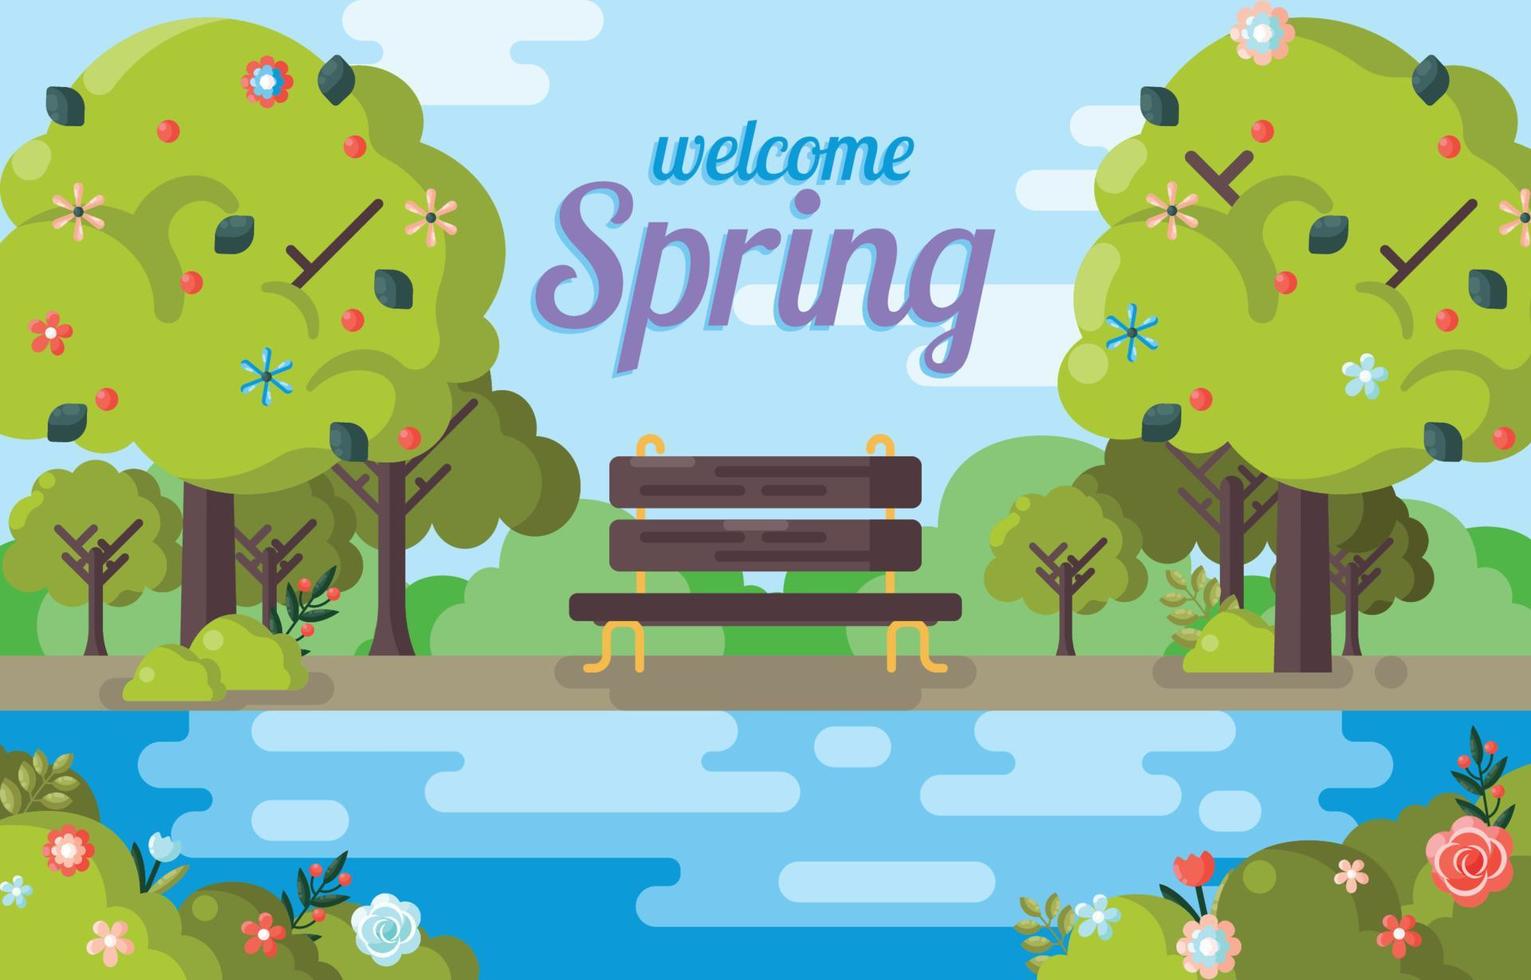 Welcome Spring Background vector